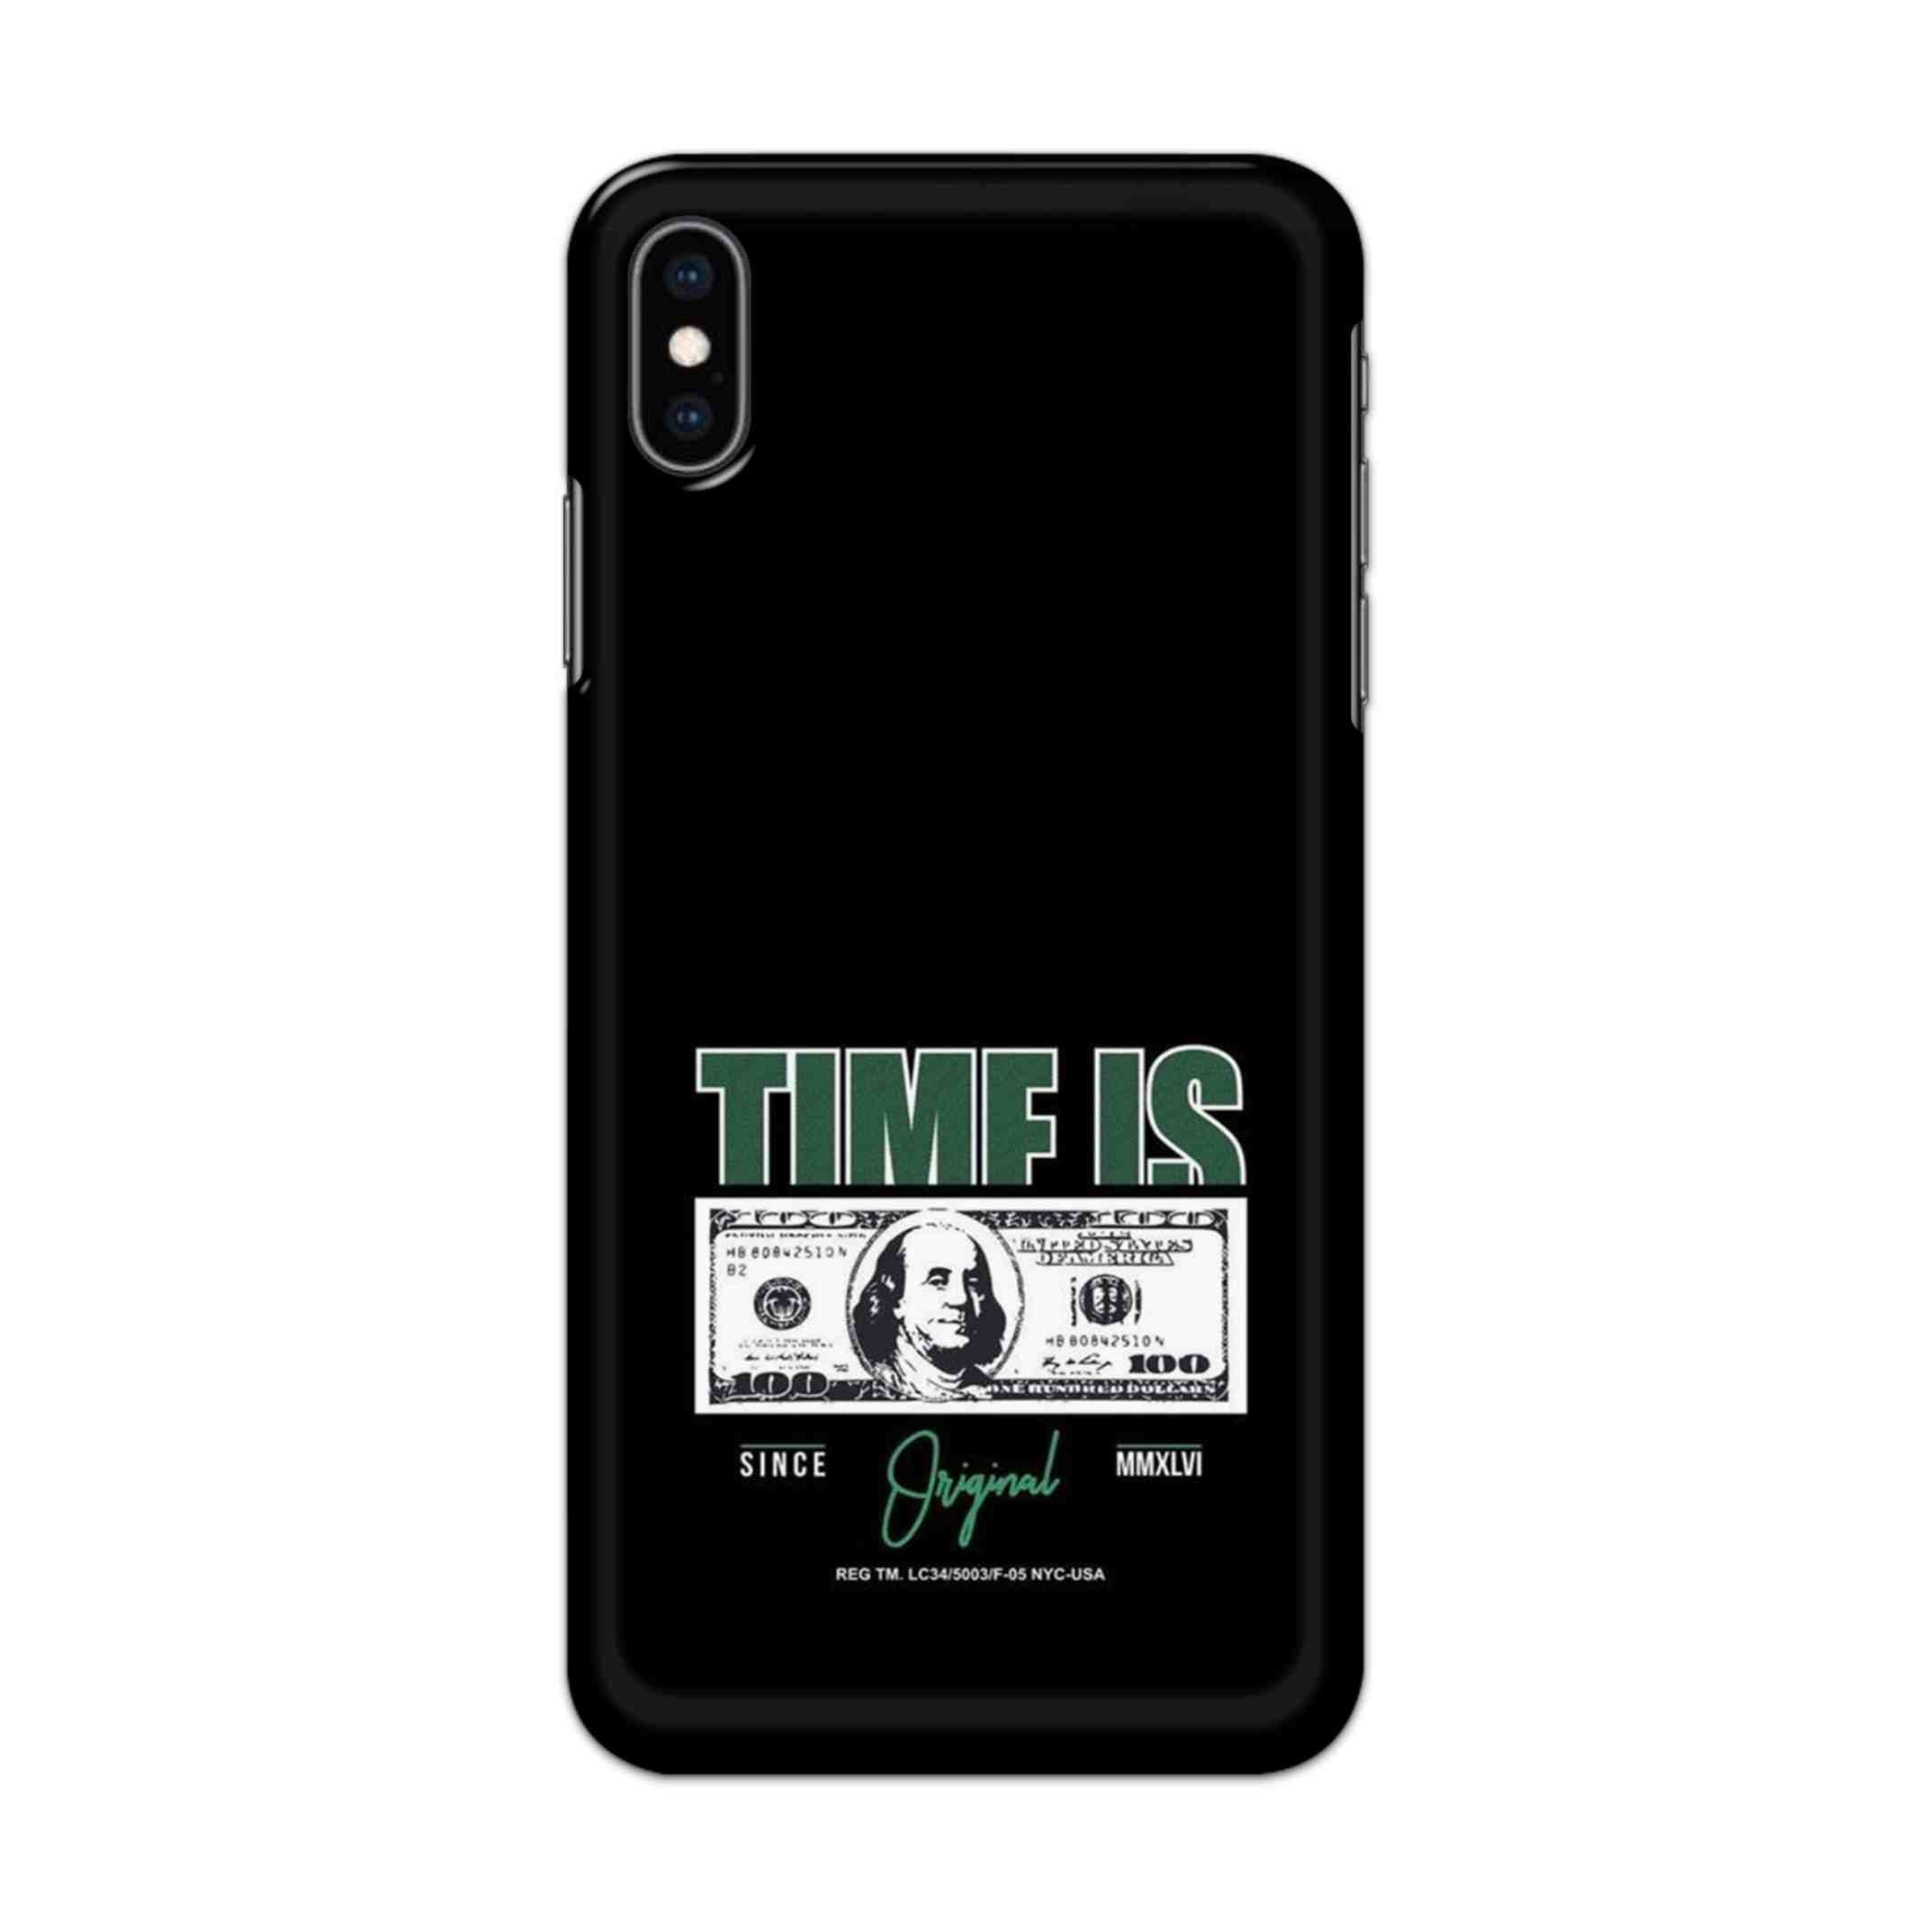 Buy Time Is Money Hard Back Mobile Phone Case/Cover For iPhone XS MAX Online